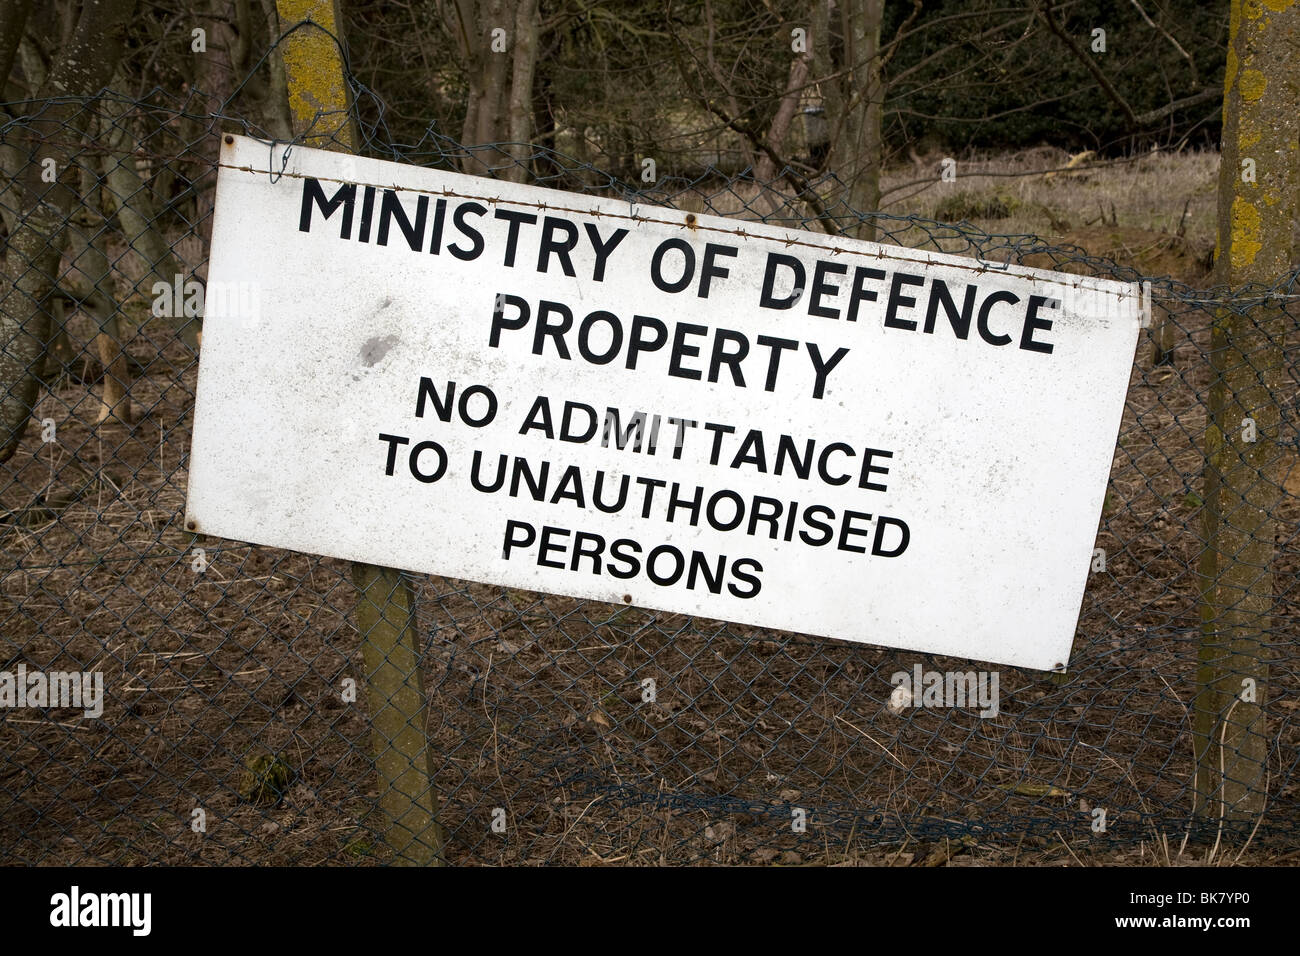 Ministry of Defence property sign No admittance to unauthorised persons on fence Stock Photo